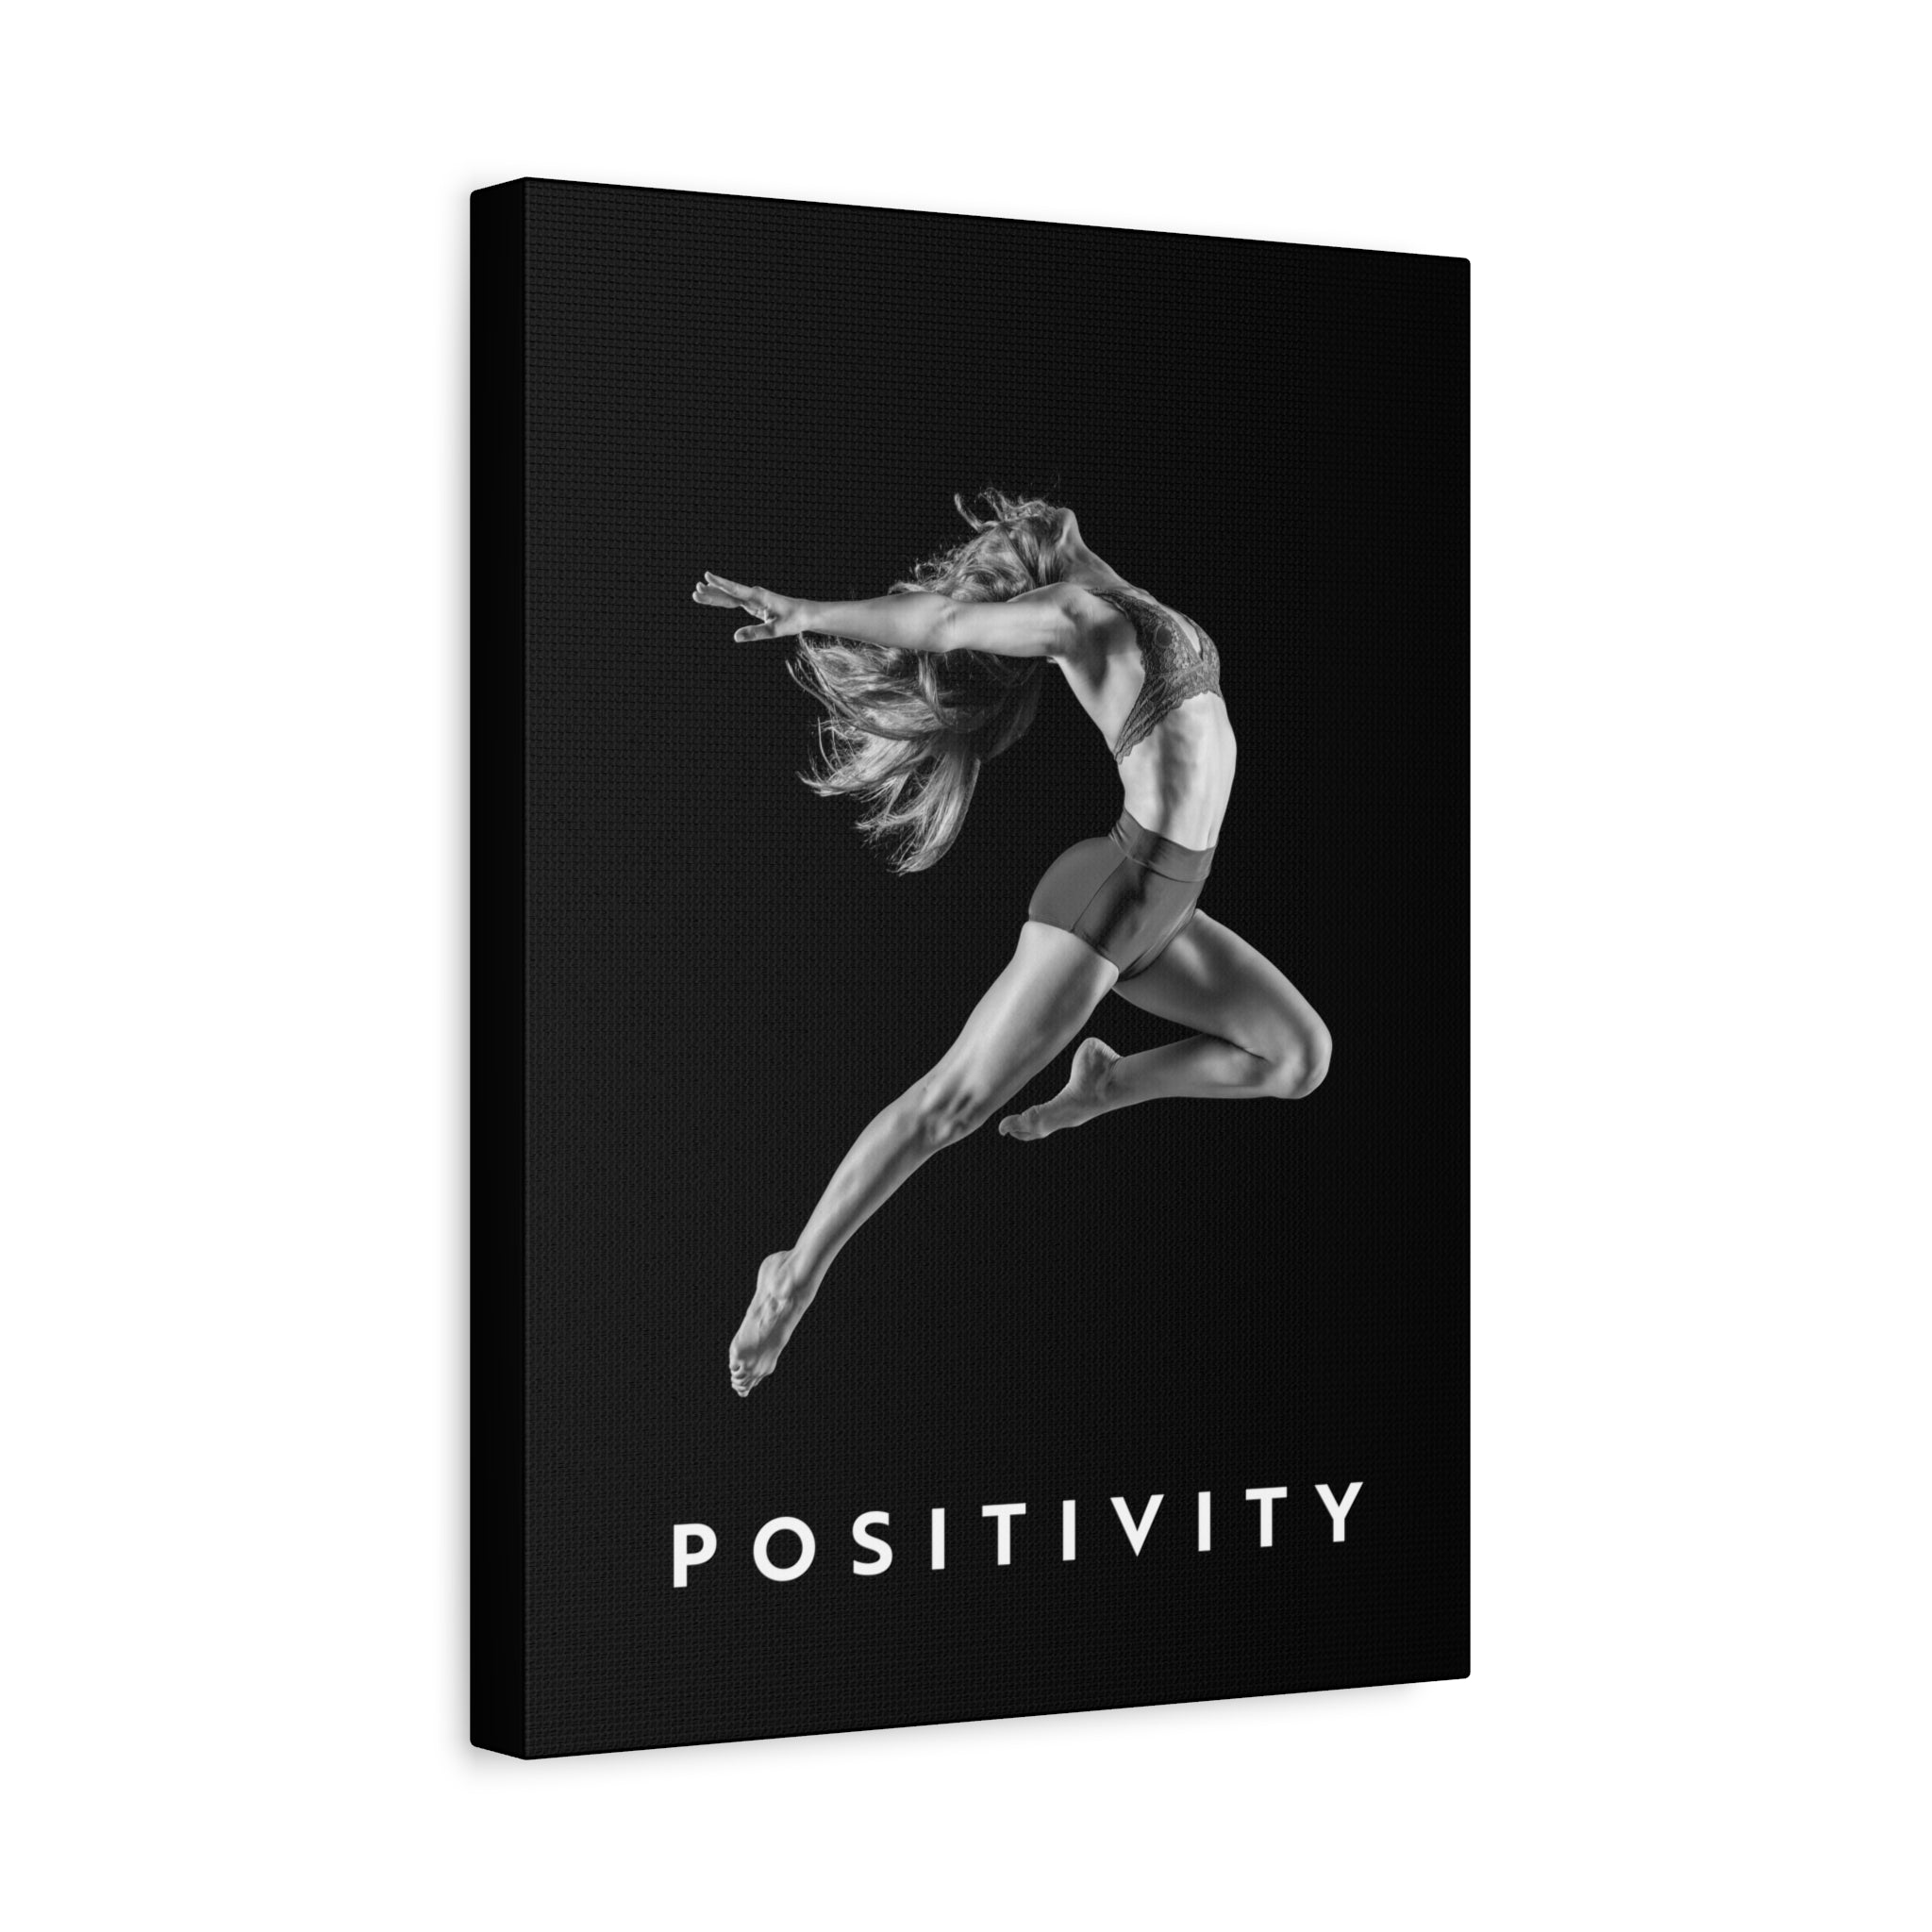 Positivity - Airborne Black And White - Wall Art additional image 2